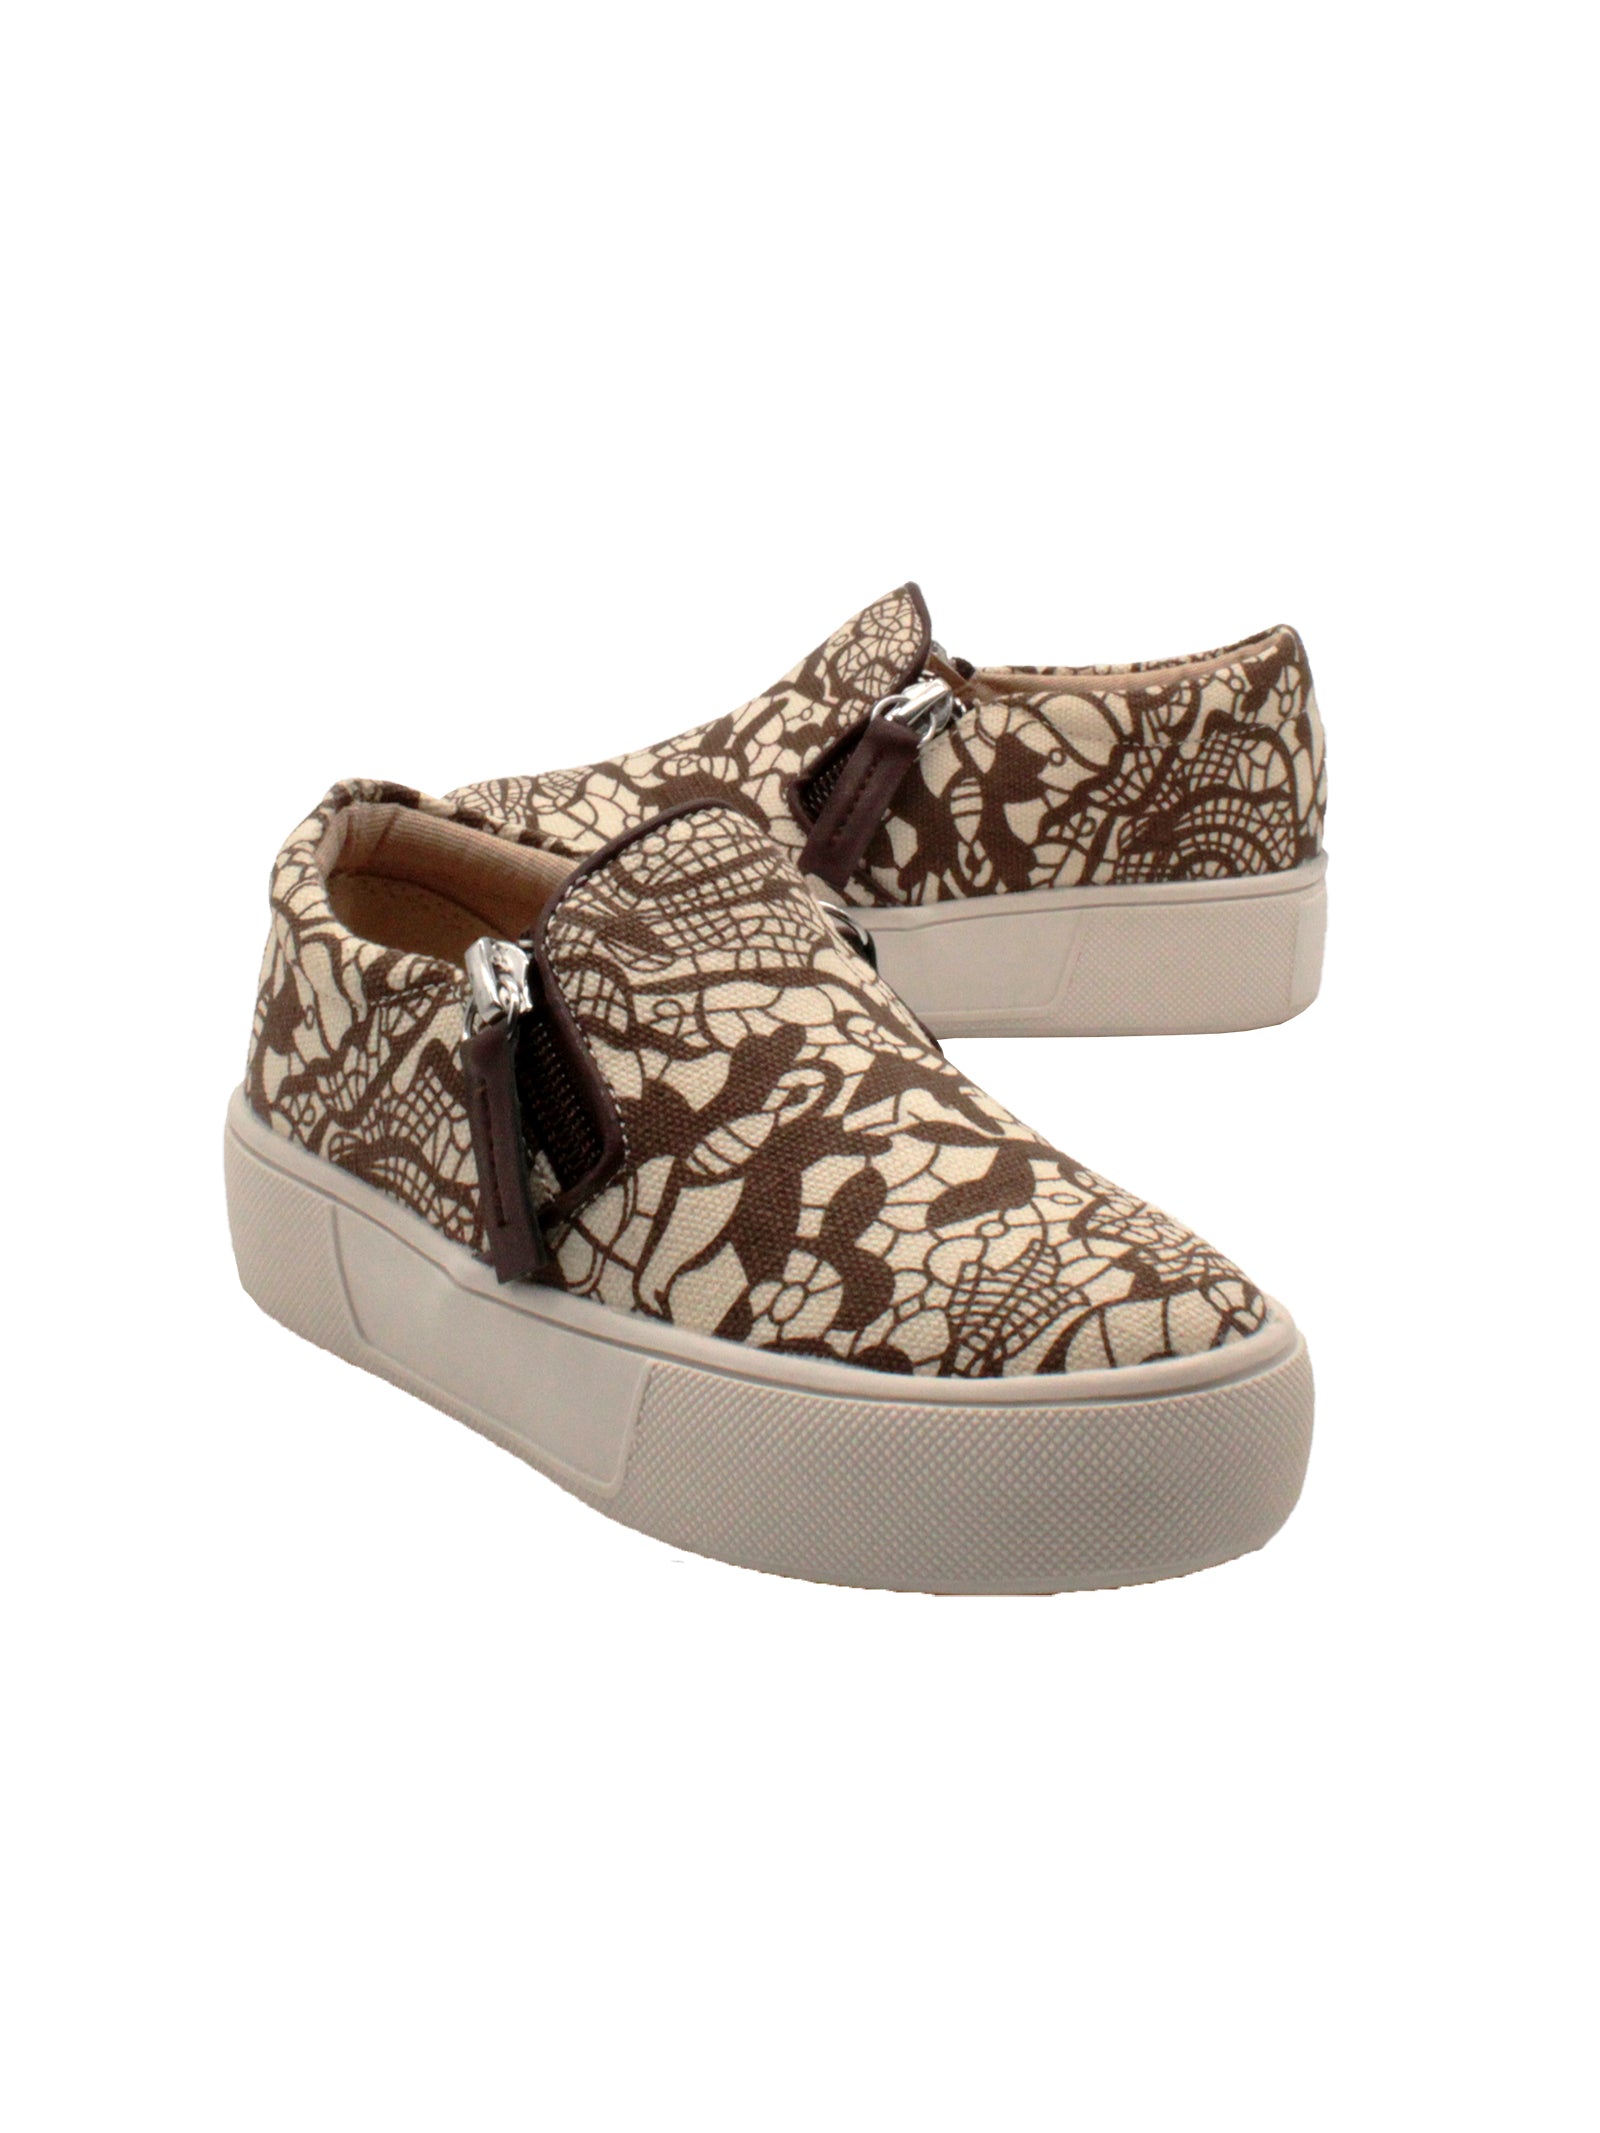 Volatile Kid’s ‘Chorus’ brown lace double zipper sneaker in printed cotton canvas is designed to easily slip on and off. They feature a cushioned sock stationed on a textured rubber sneaker bottom that’s ready for all day play. Pair them with casual outfits and dress up looks alike. 3/4 angle